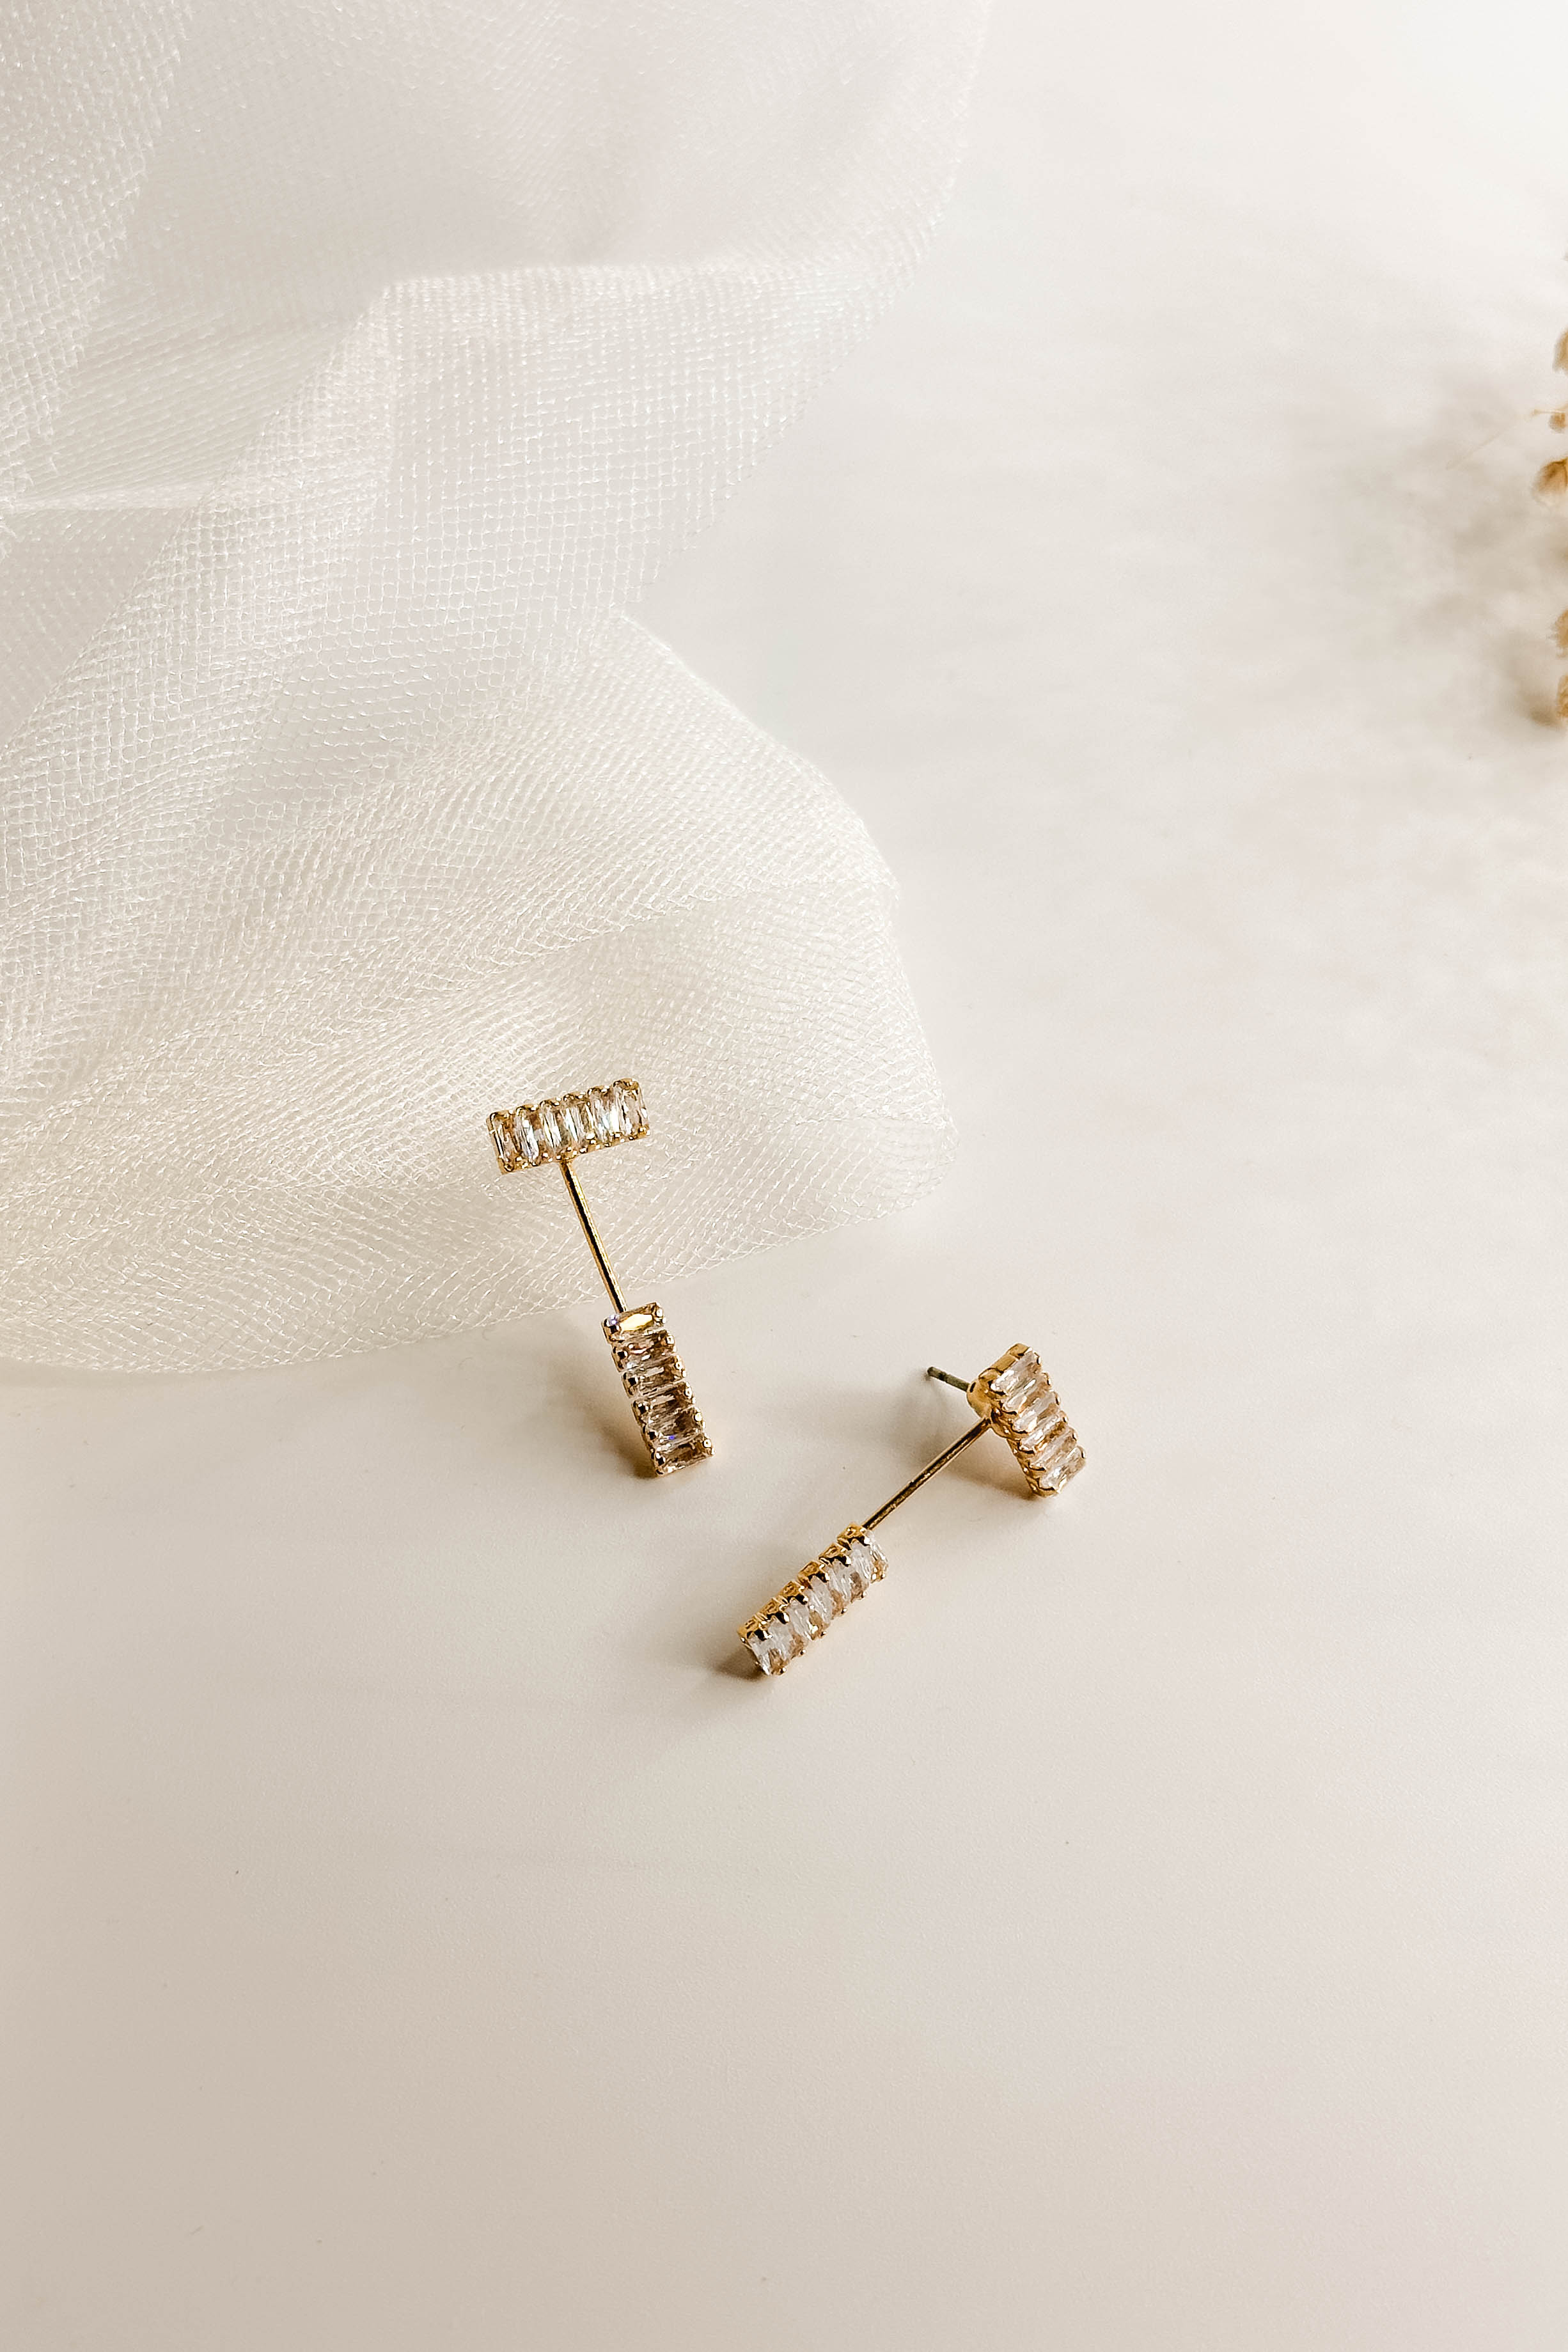 Top view of the So Easy Earrings which features cluster of clear stones linked by a gold bar with another set of clear stones, shown on white paper.